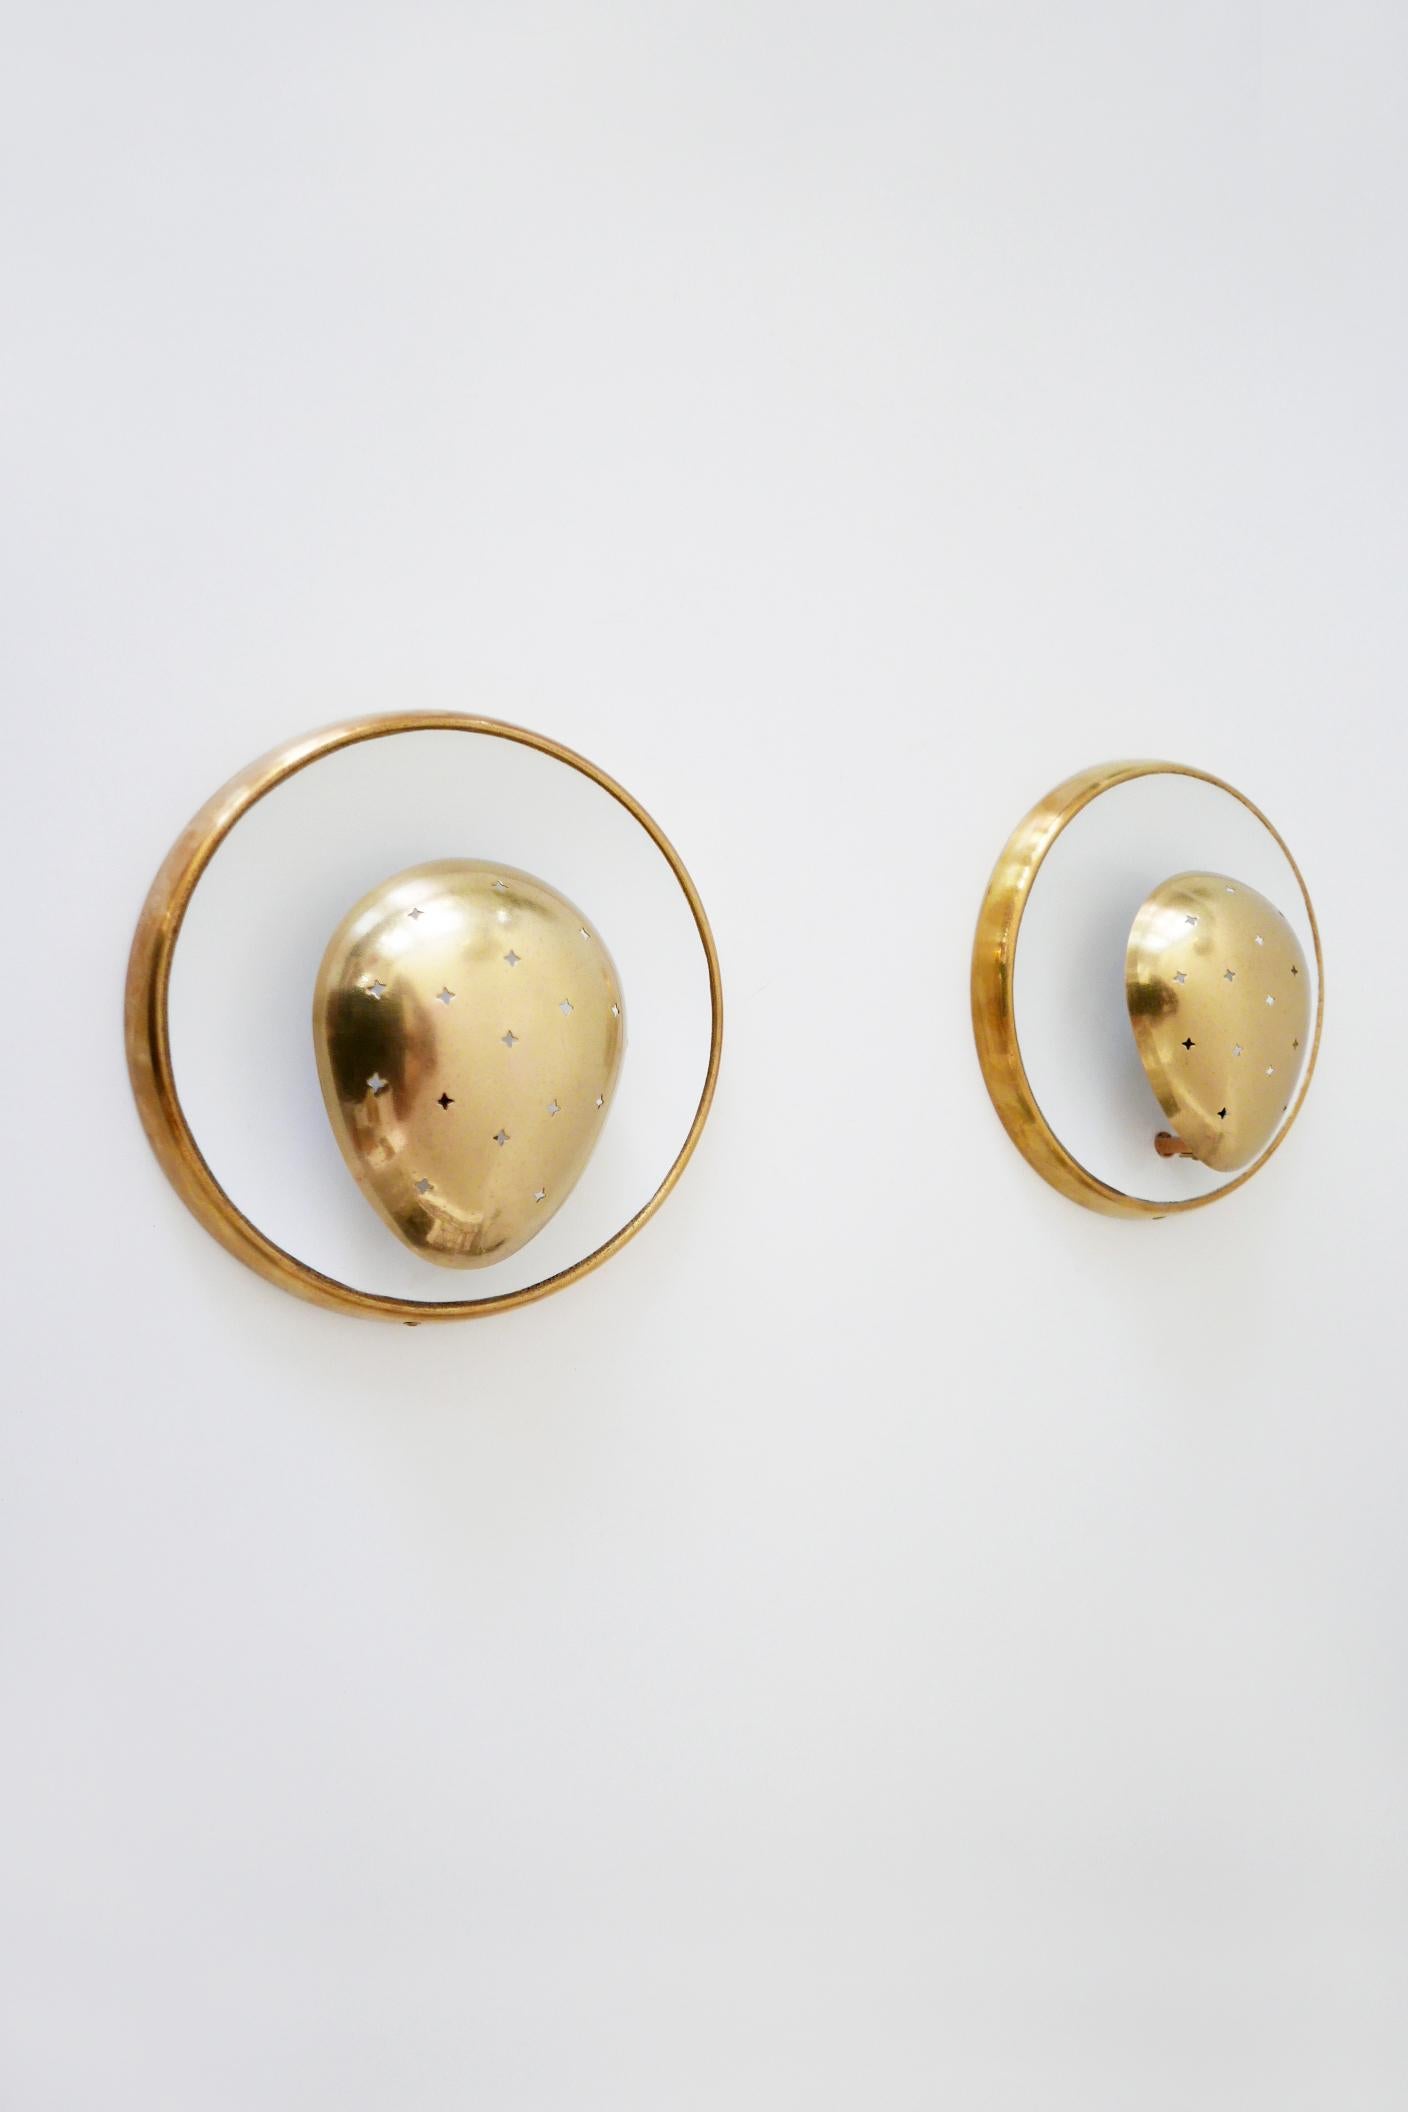 Set of Two Mid-Century Modern Sputnik Brass Wall Lamps or Sconces, 1950s, France 7